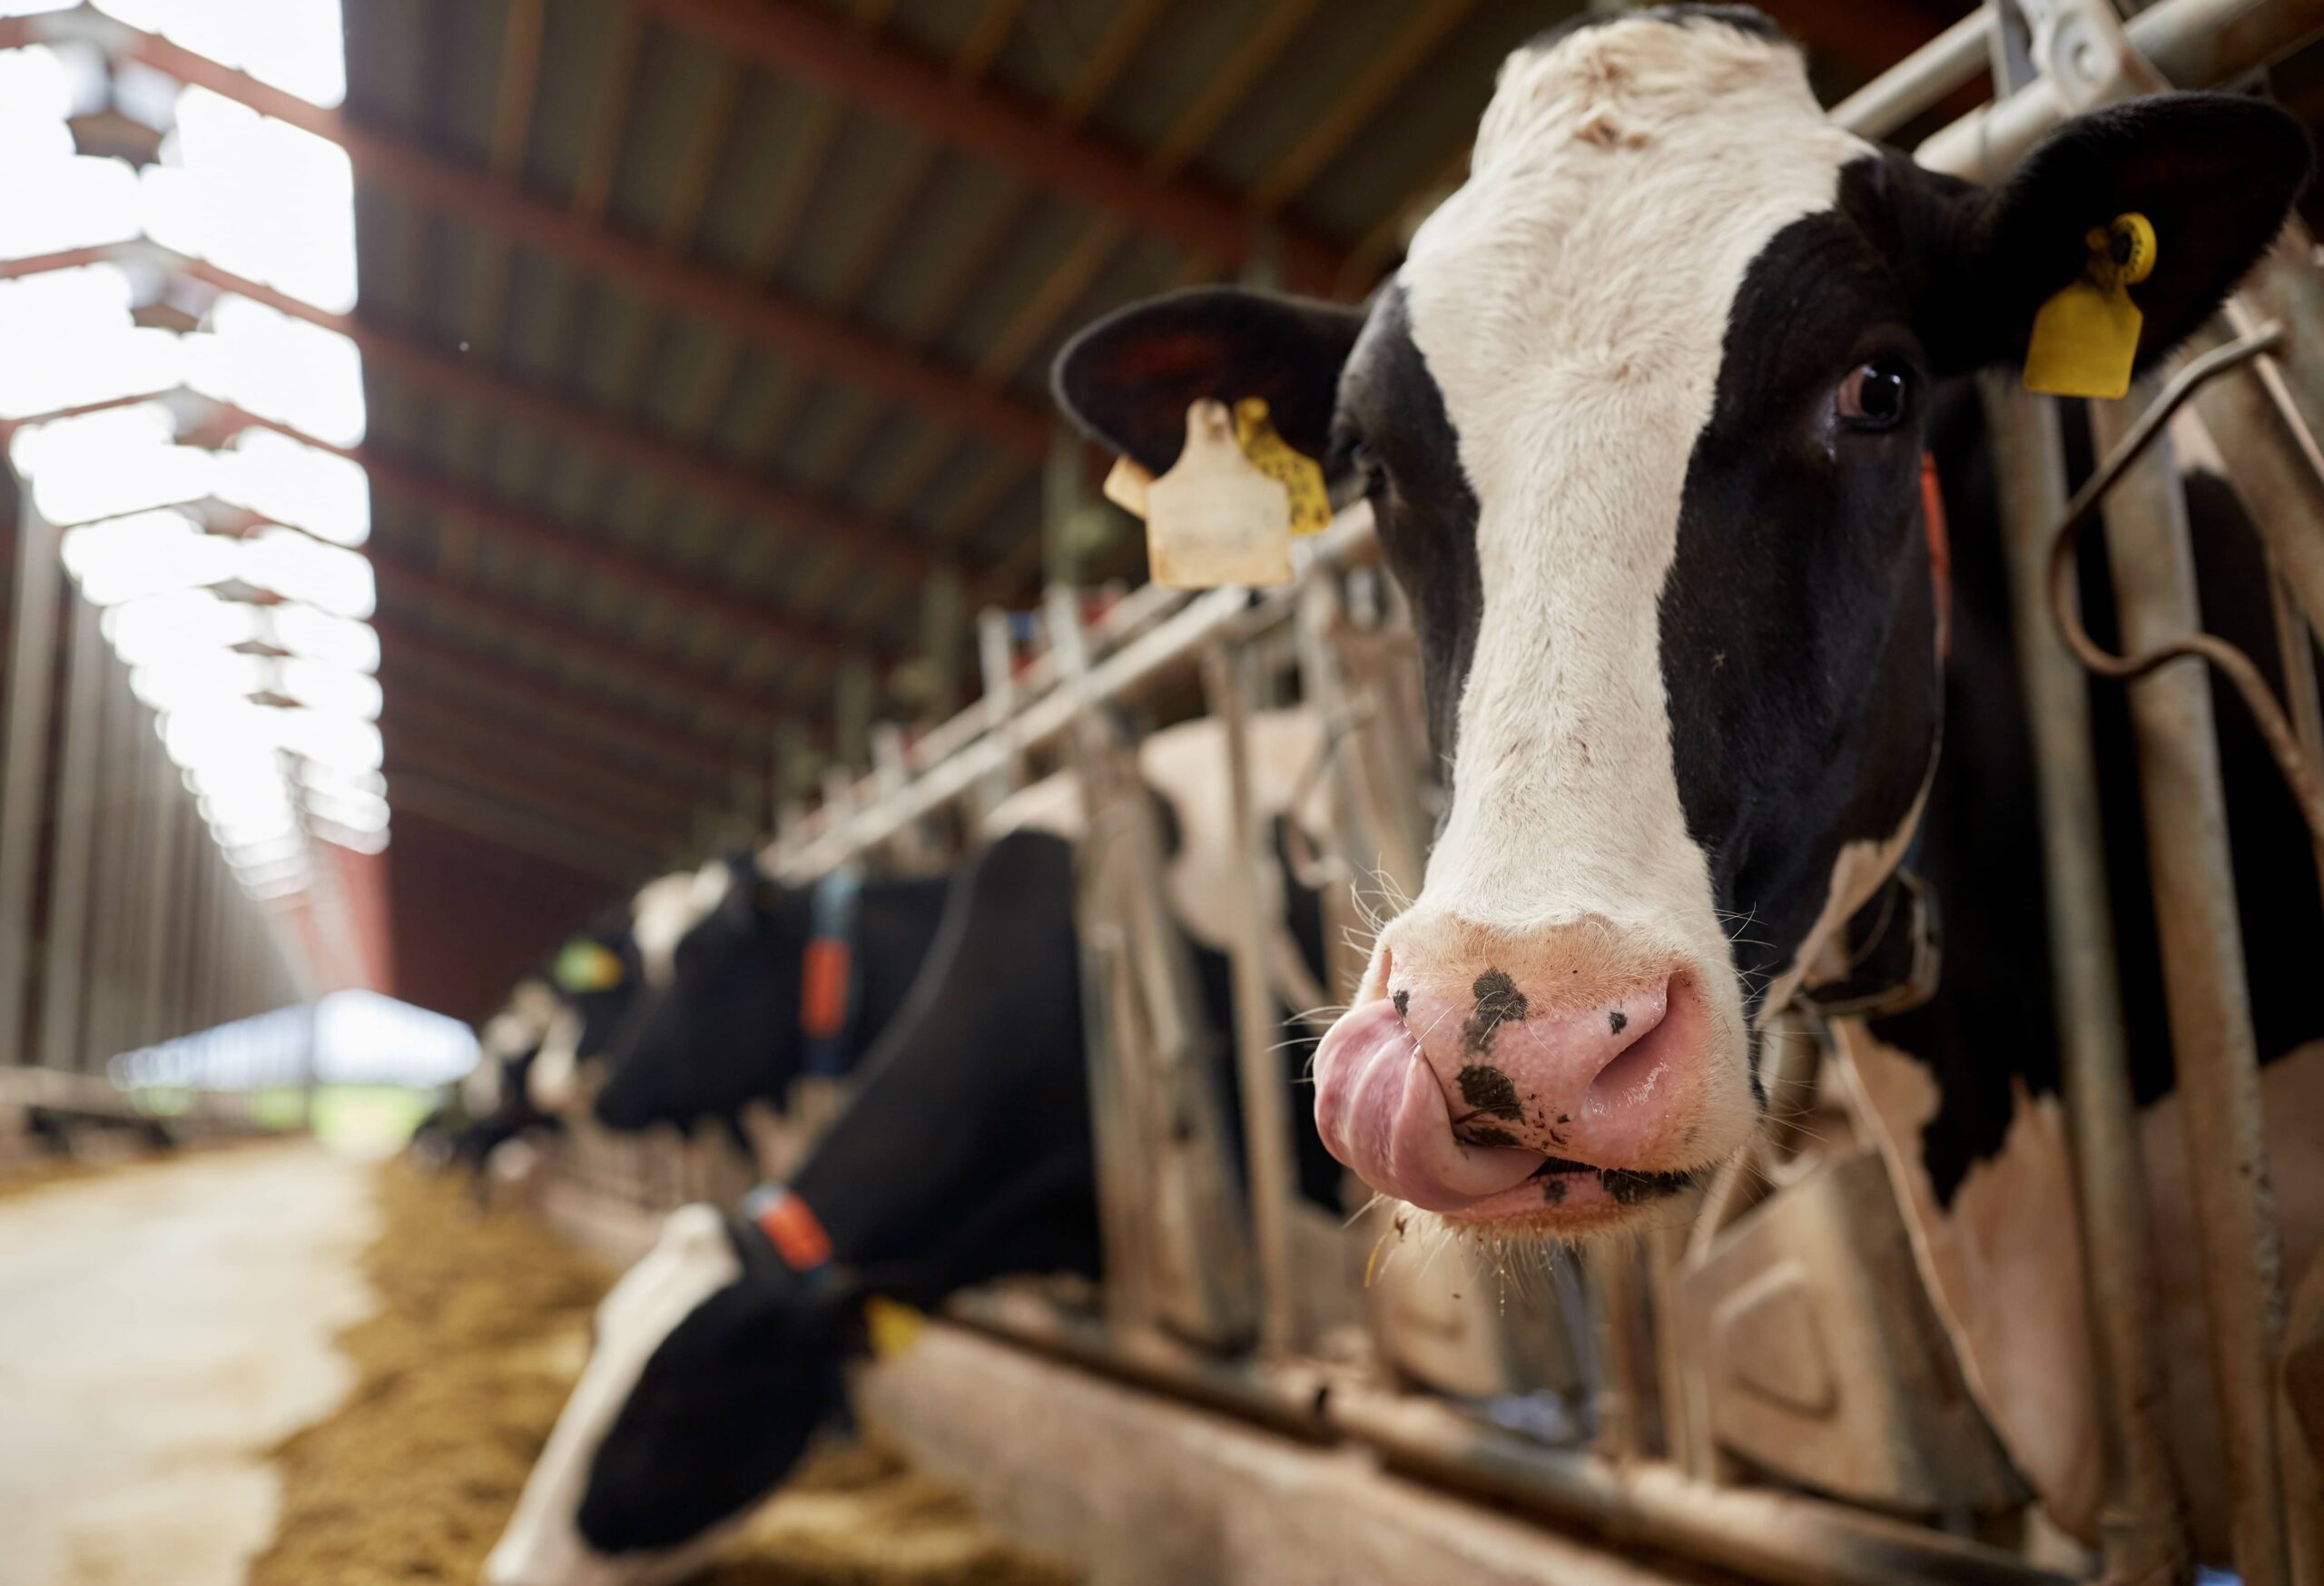 How Does Proper Lighting Affect Dairy Cow Health and Milk Production?